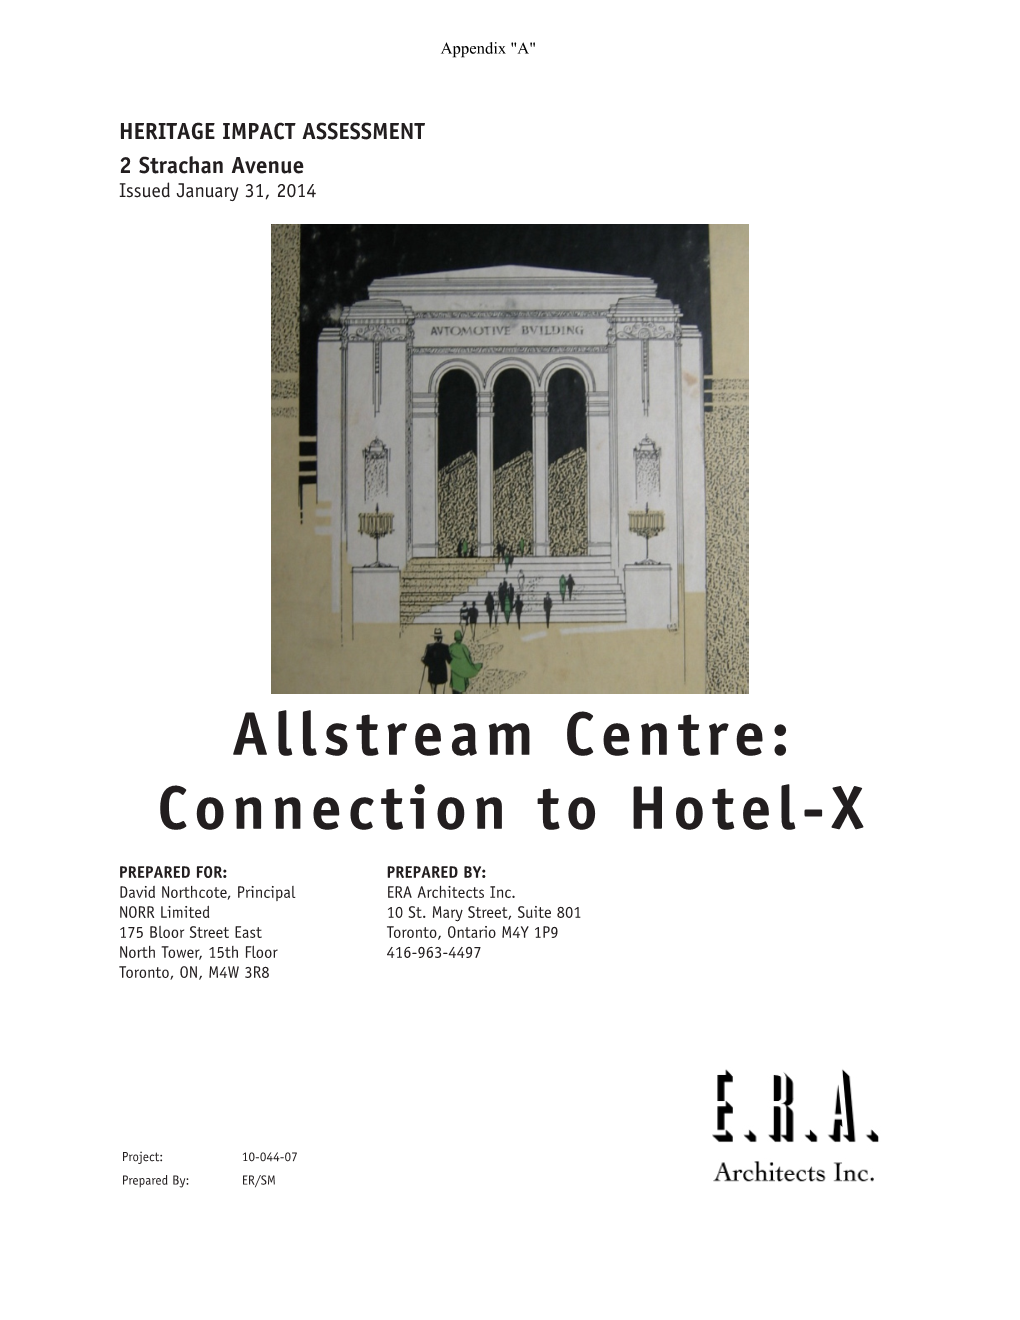 Allstream Centre: Connection to Hotel-X